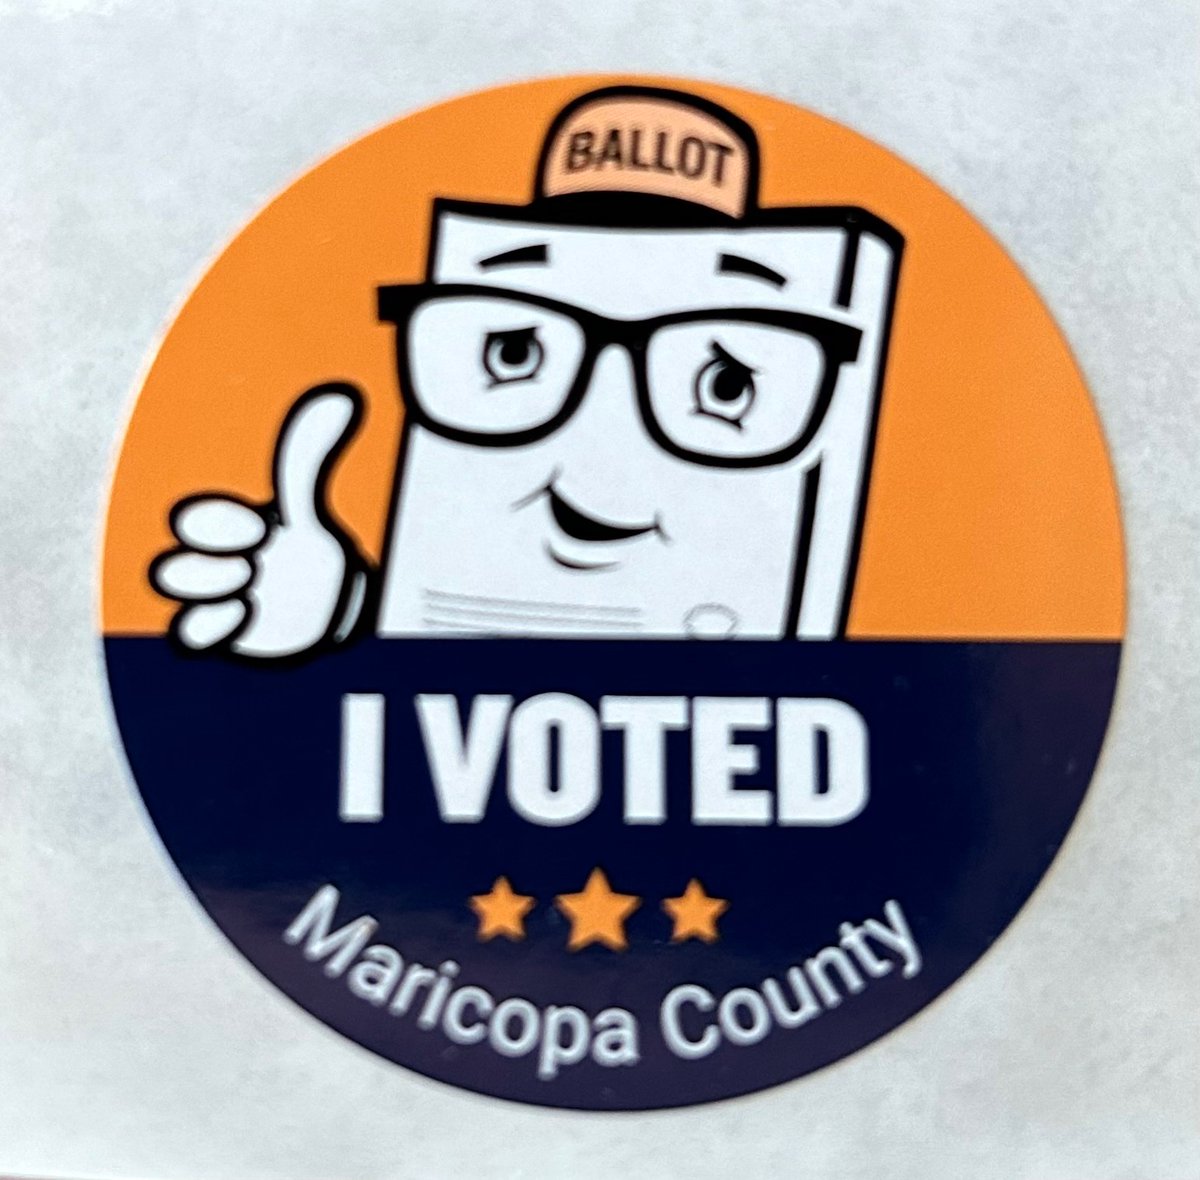 Maricopa County poll workers continue to set the standard for informative and friendly service on Election Day. After presenting two alternate forms of identification, as permitted by Arizona law, I voted easily and quickly this morning. And I got this neat sticker to boot!